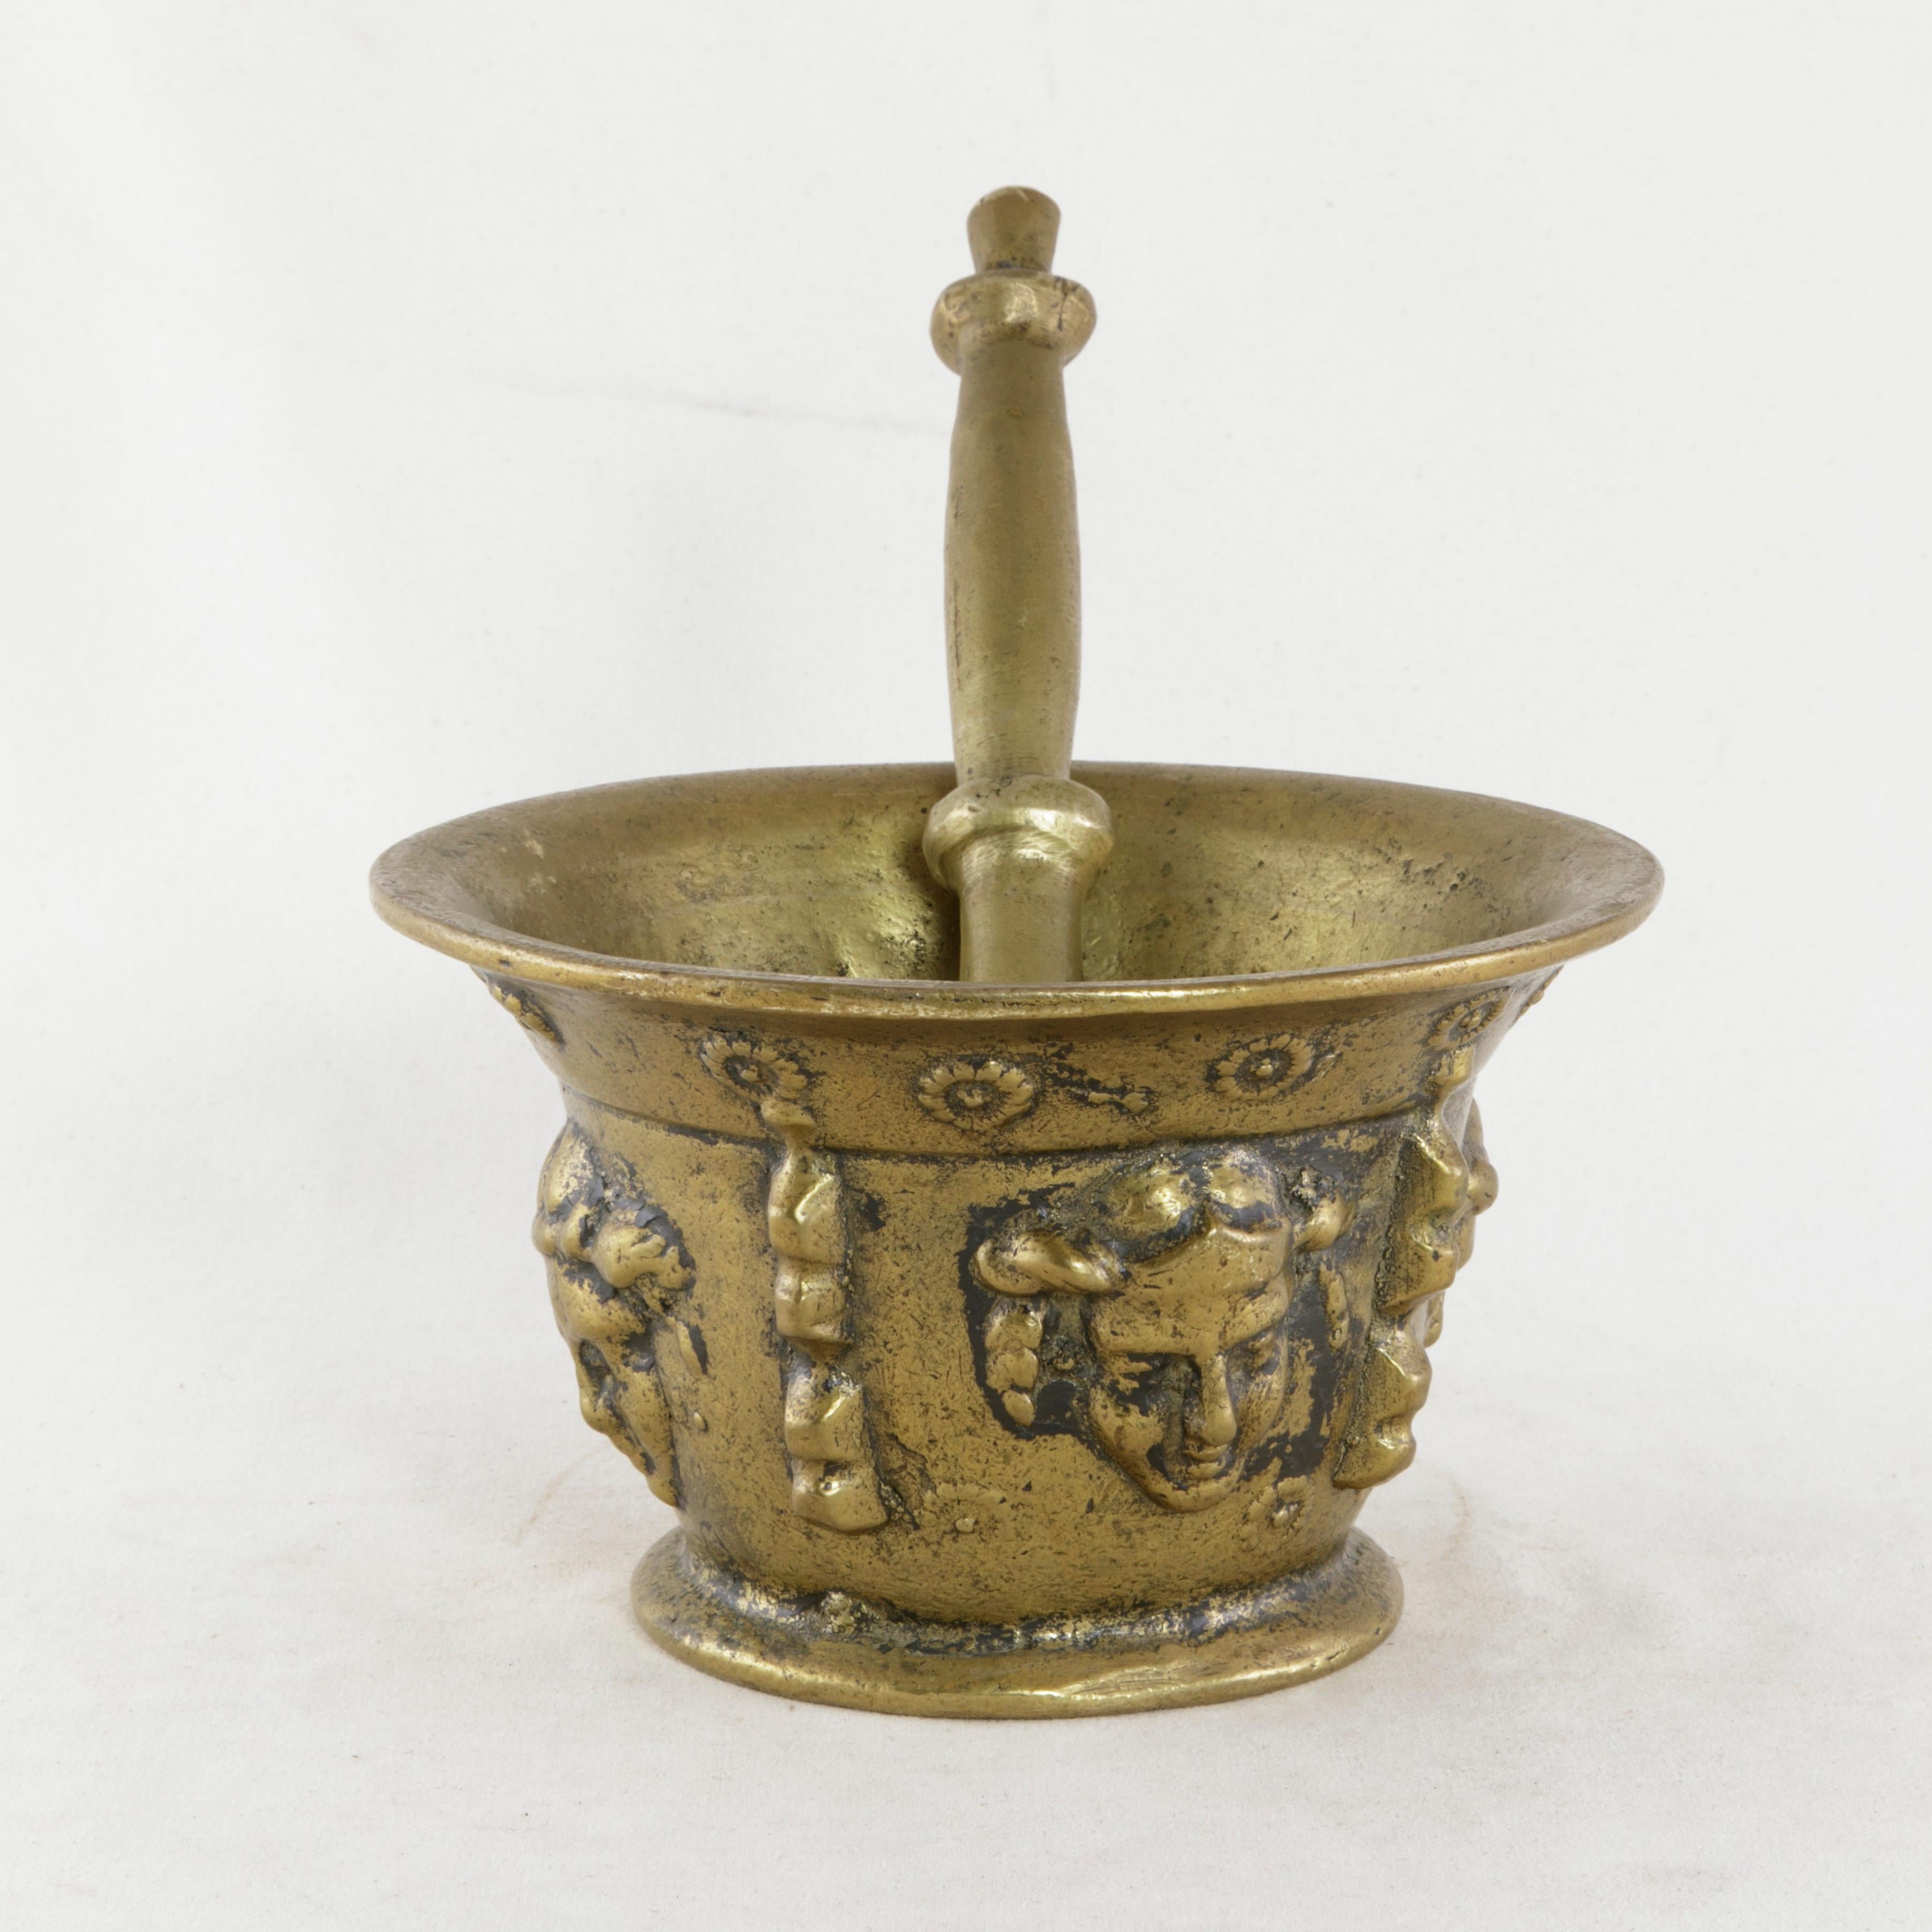 This French solid bronze mortar from the turn of the 20th century boasts its original eleven inch long bronze pestle. Its exterior is detailed with four masks and an upper ring of flowers. Originally used in a pharmacy, circa 1900.